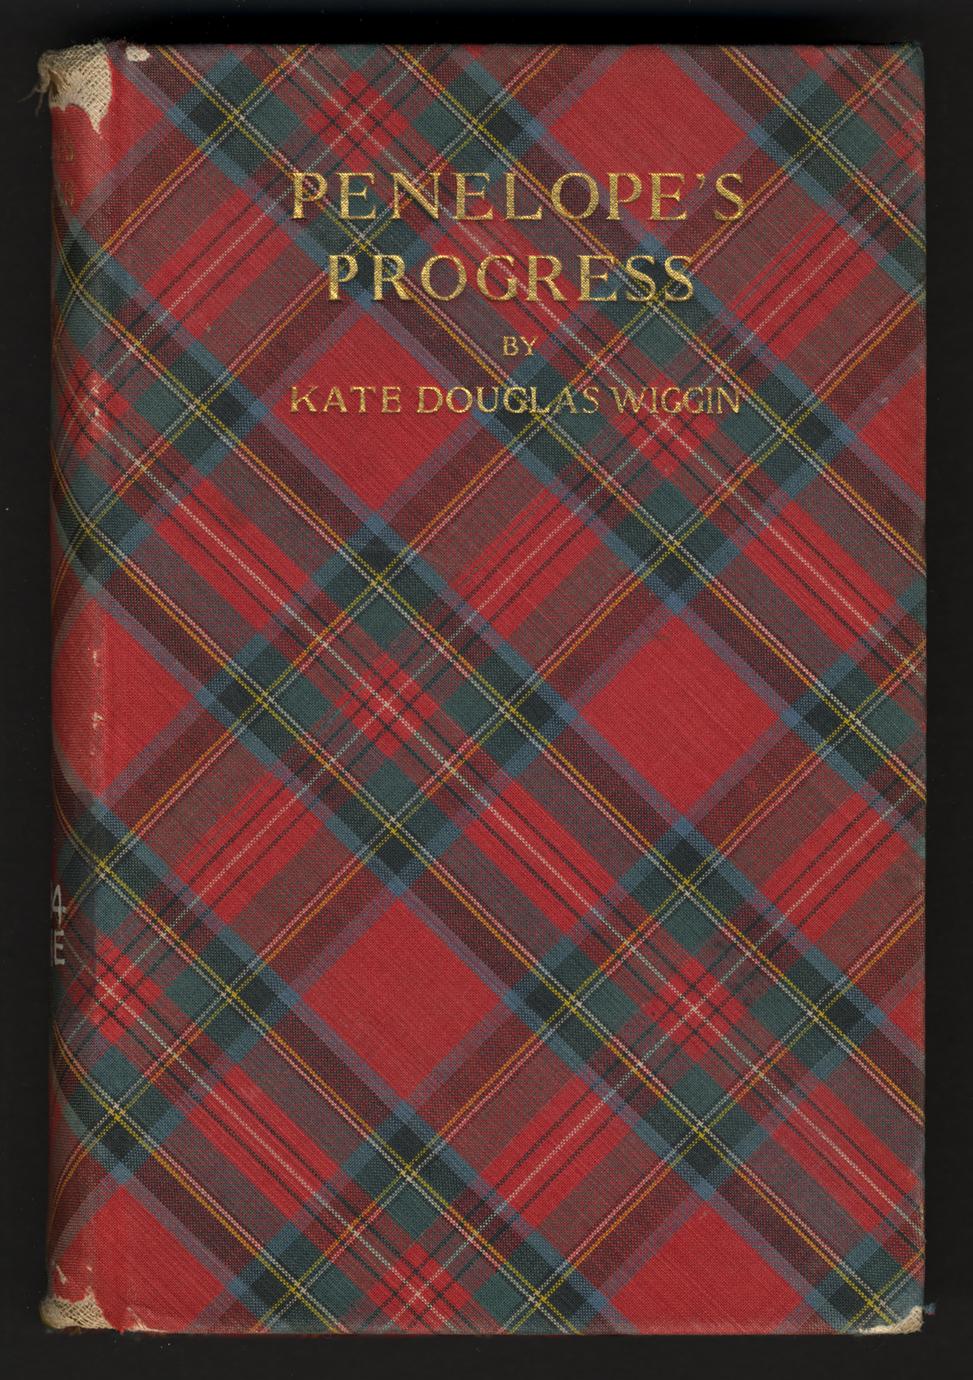 Penelope's progress : being such extracts from the commonplace book of Penelope Hamilton as relate to her experiences in Scotland (1 of 3)